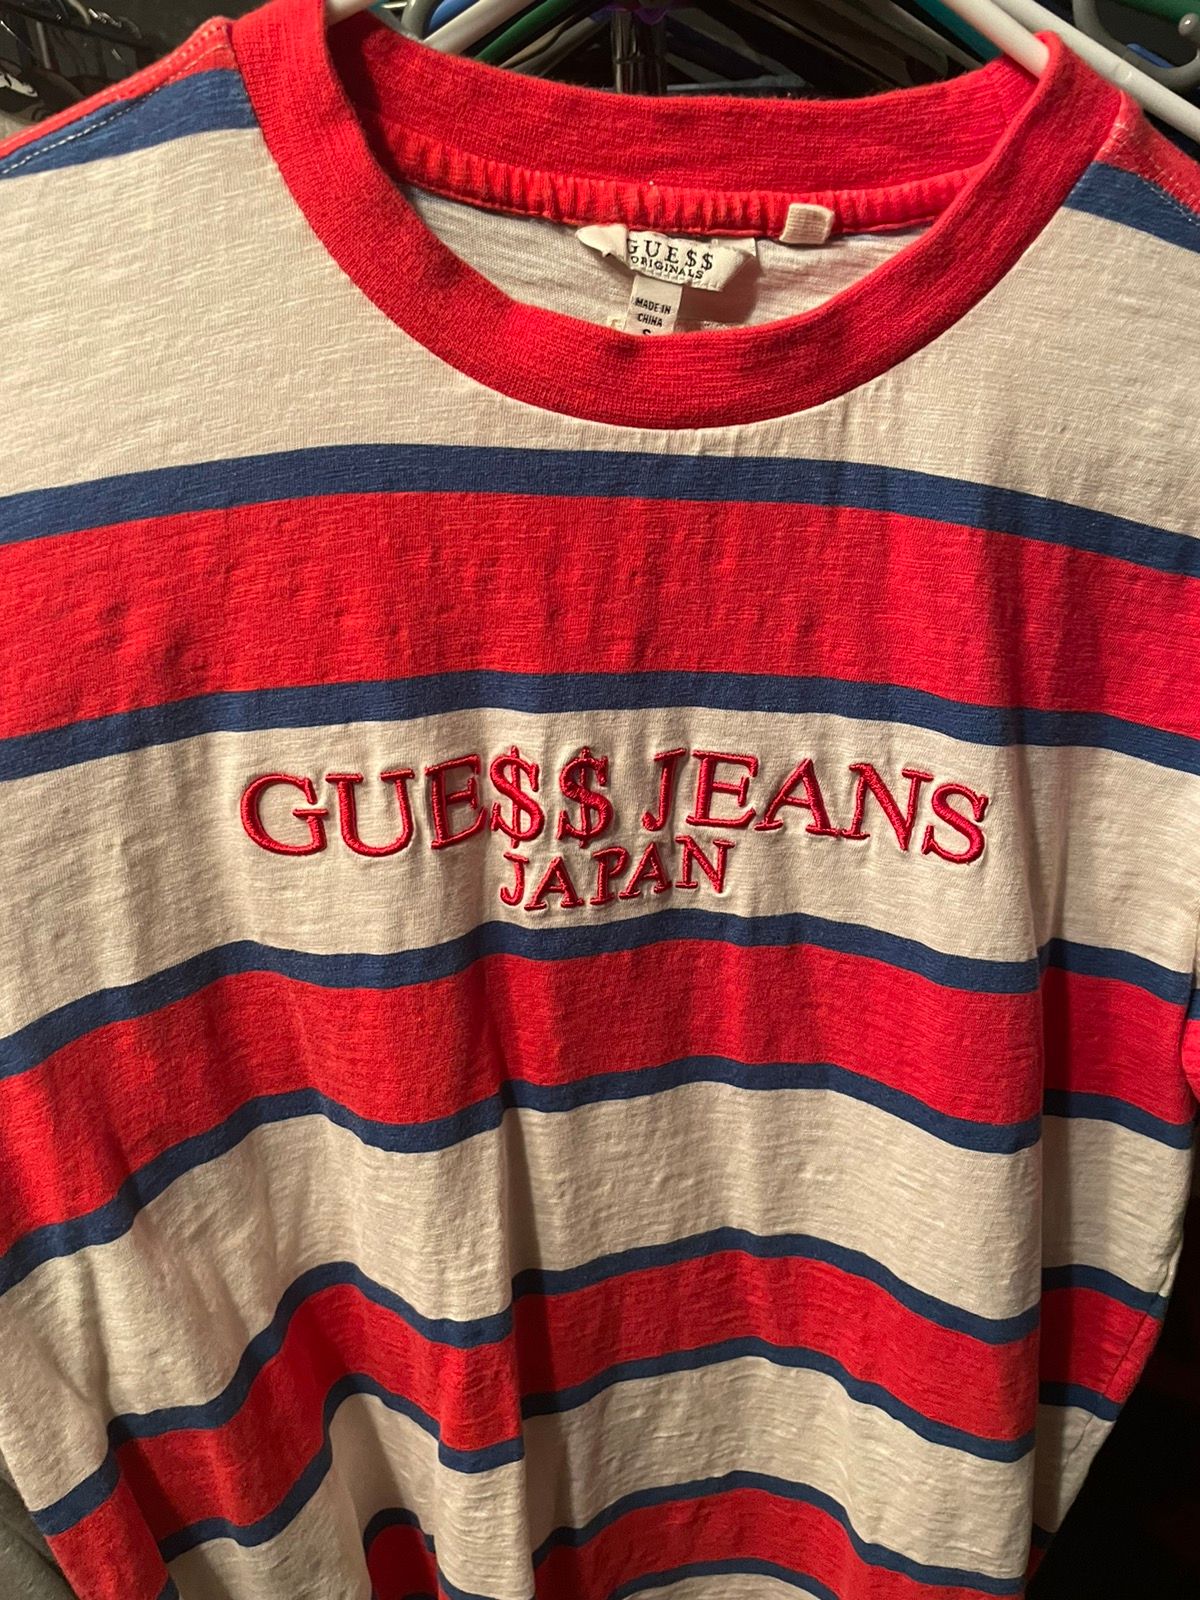 Guess Jeans Japan x Rocky T Shirt White | Grailed